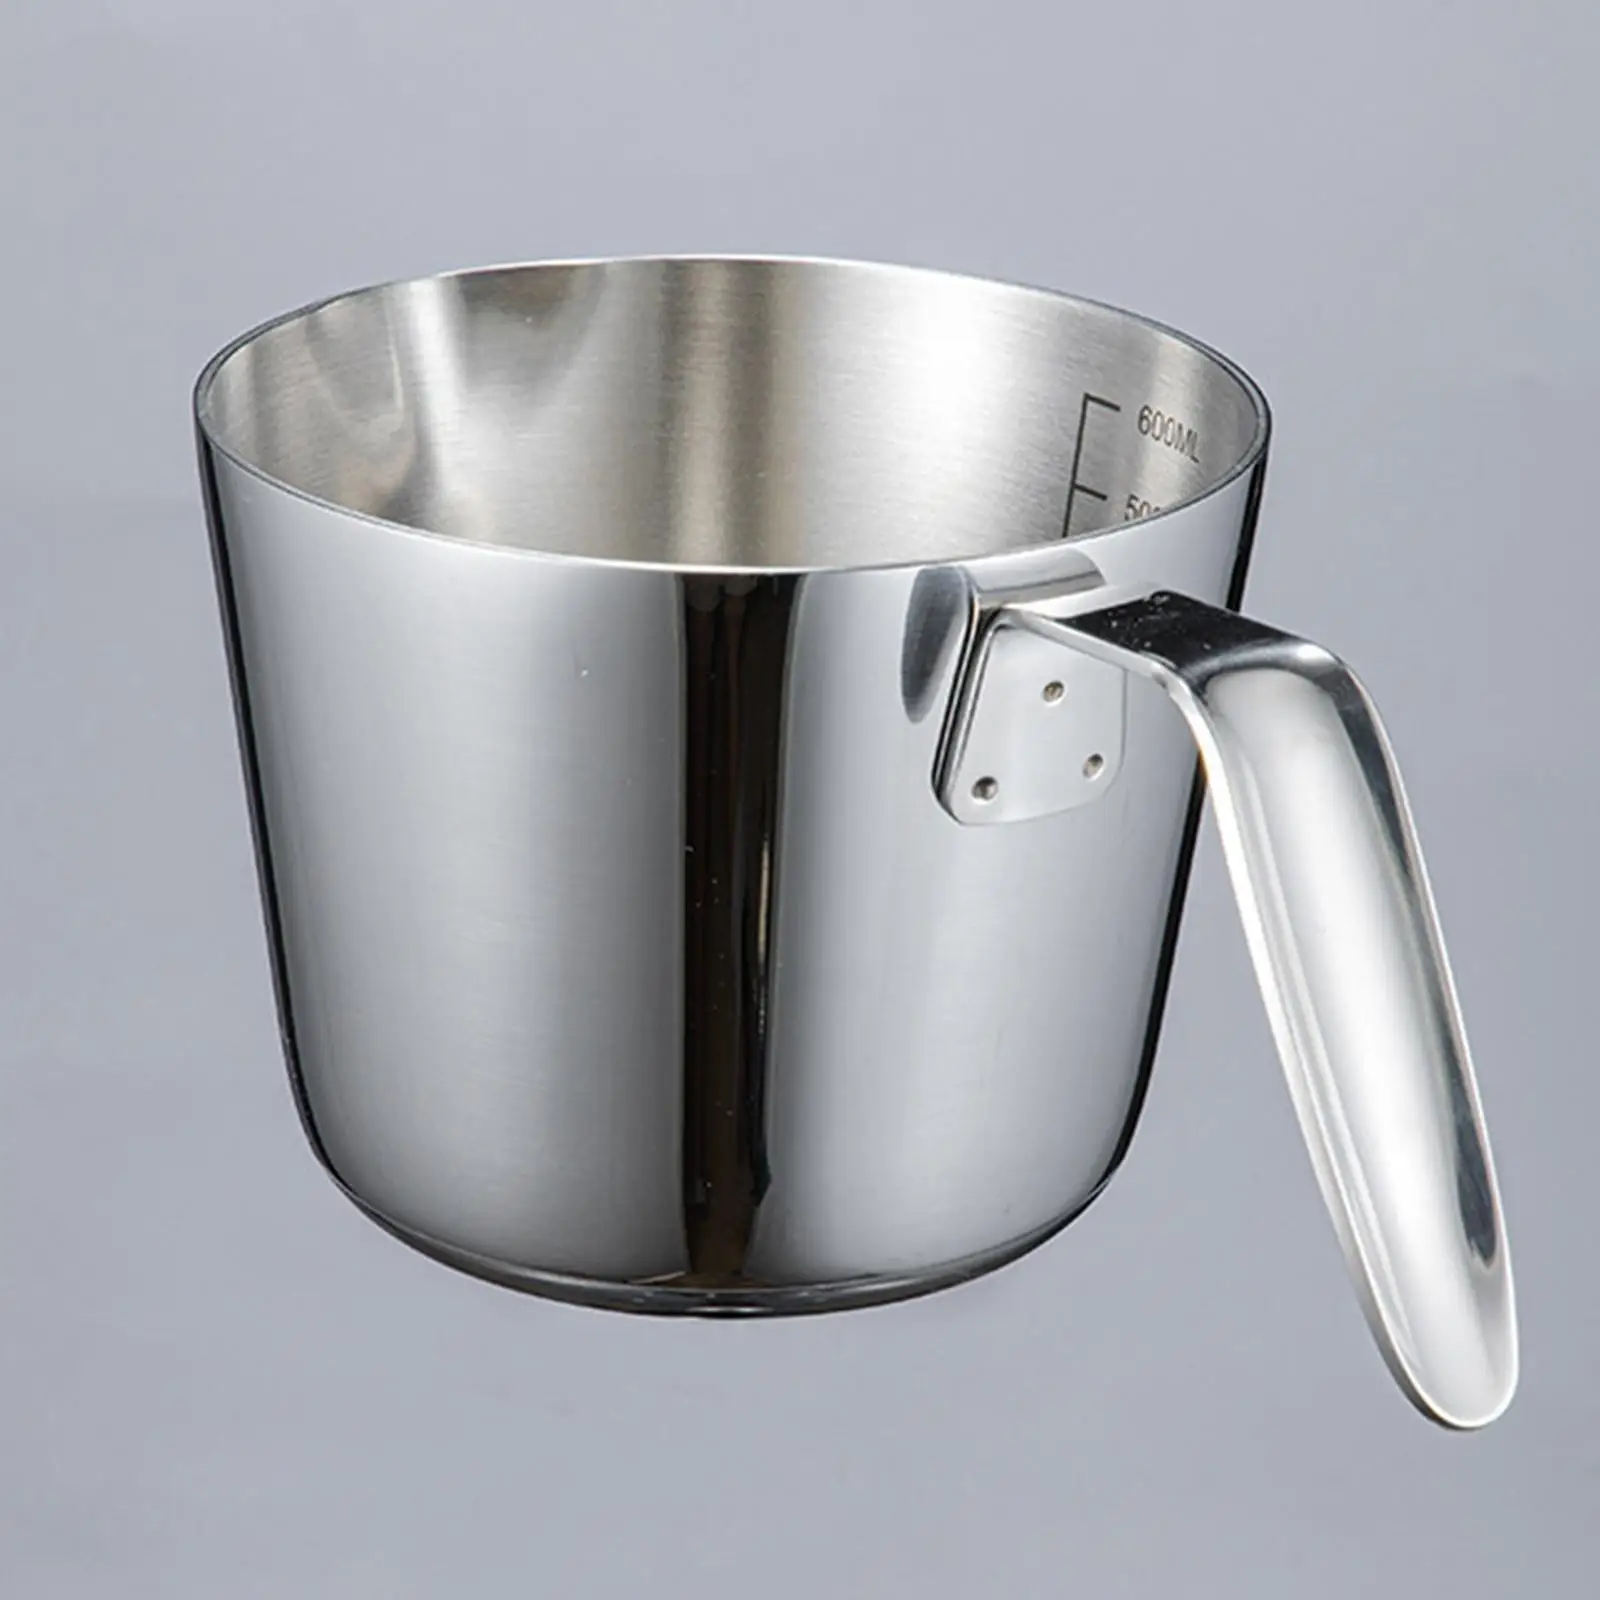 Thickening Stainless Steel Milk Frothing Pitcher Steamer Cup Jug Milk Frothing Pitcher Jug for Tea Cake Ice Cream Coffee